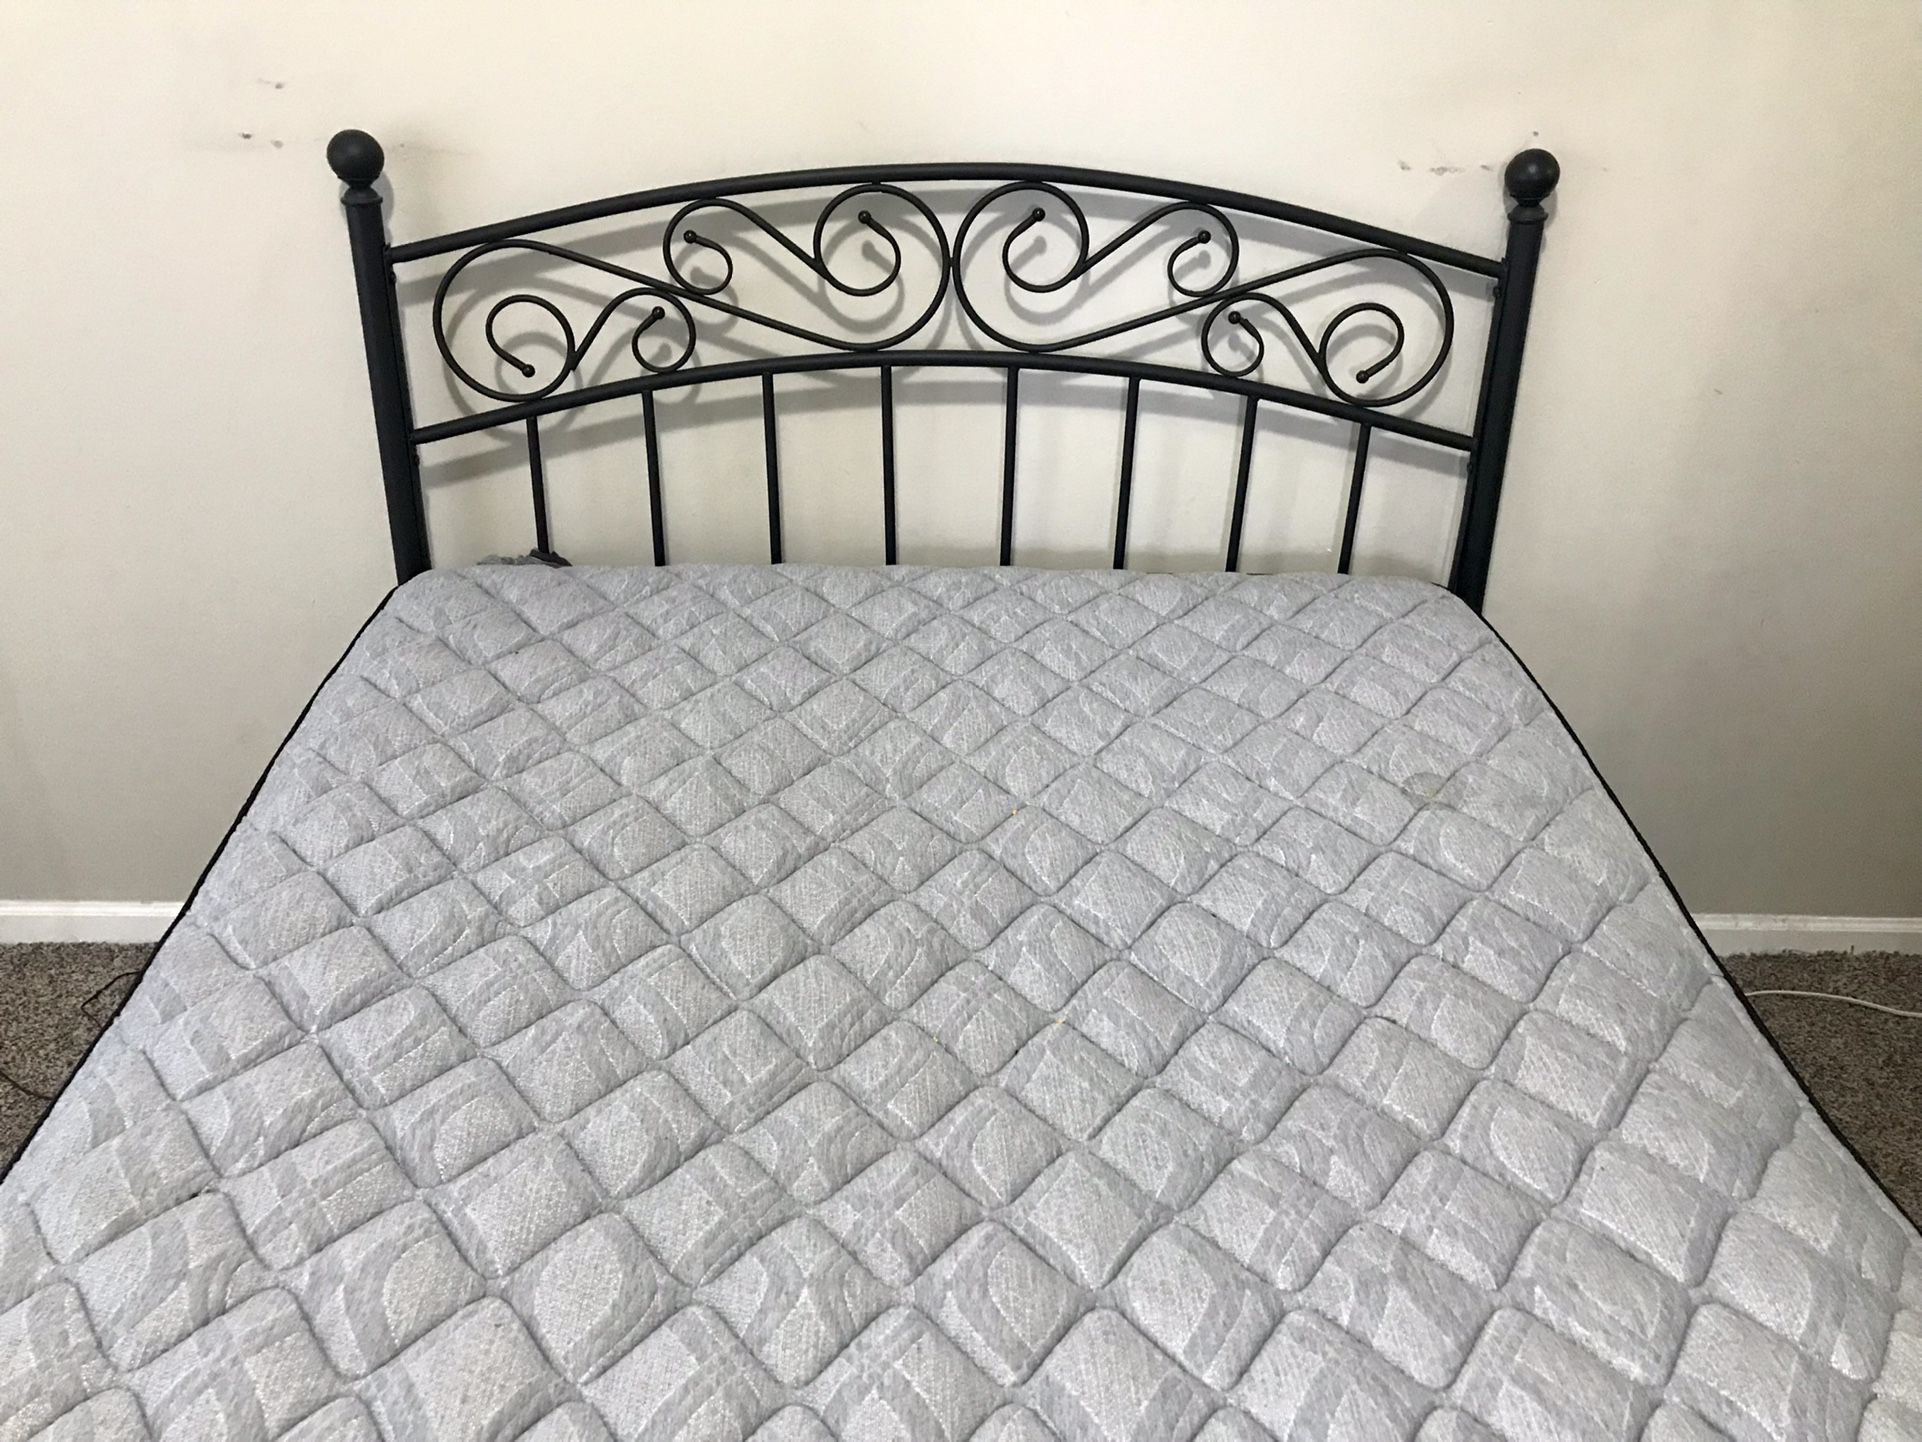 Black Metal Queen Headboard With Frame And Mattress And Box Spring